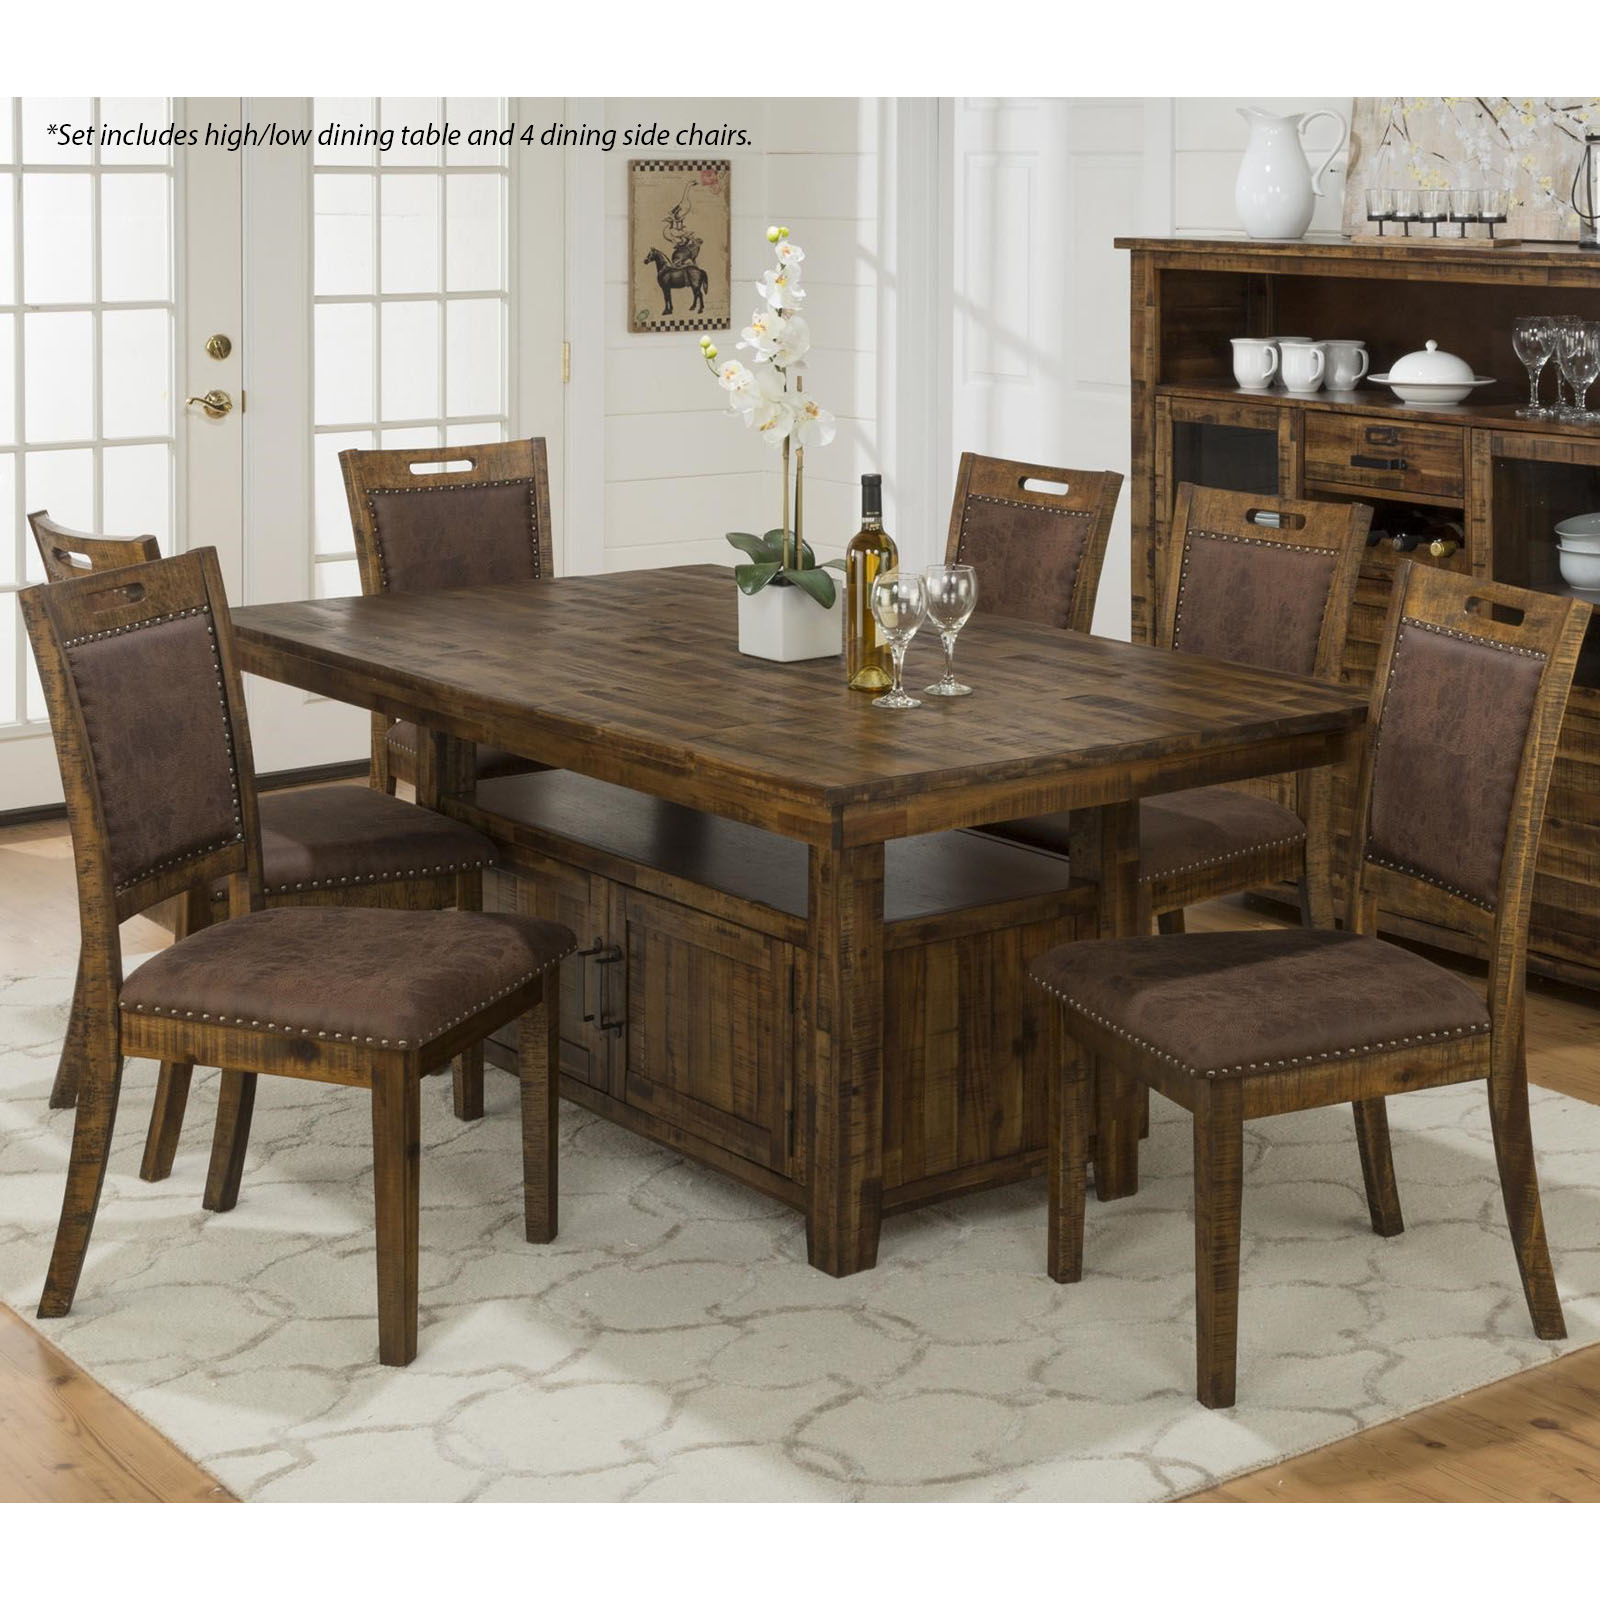 Jofran Cannon Valley Storage Dining Table & 4 Side Chairs